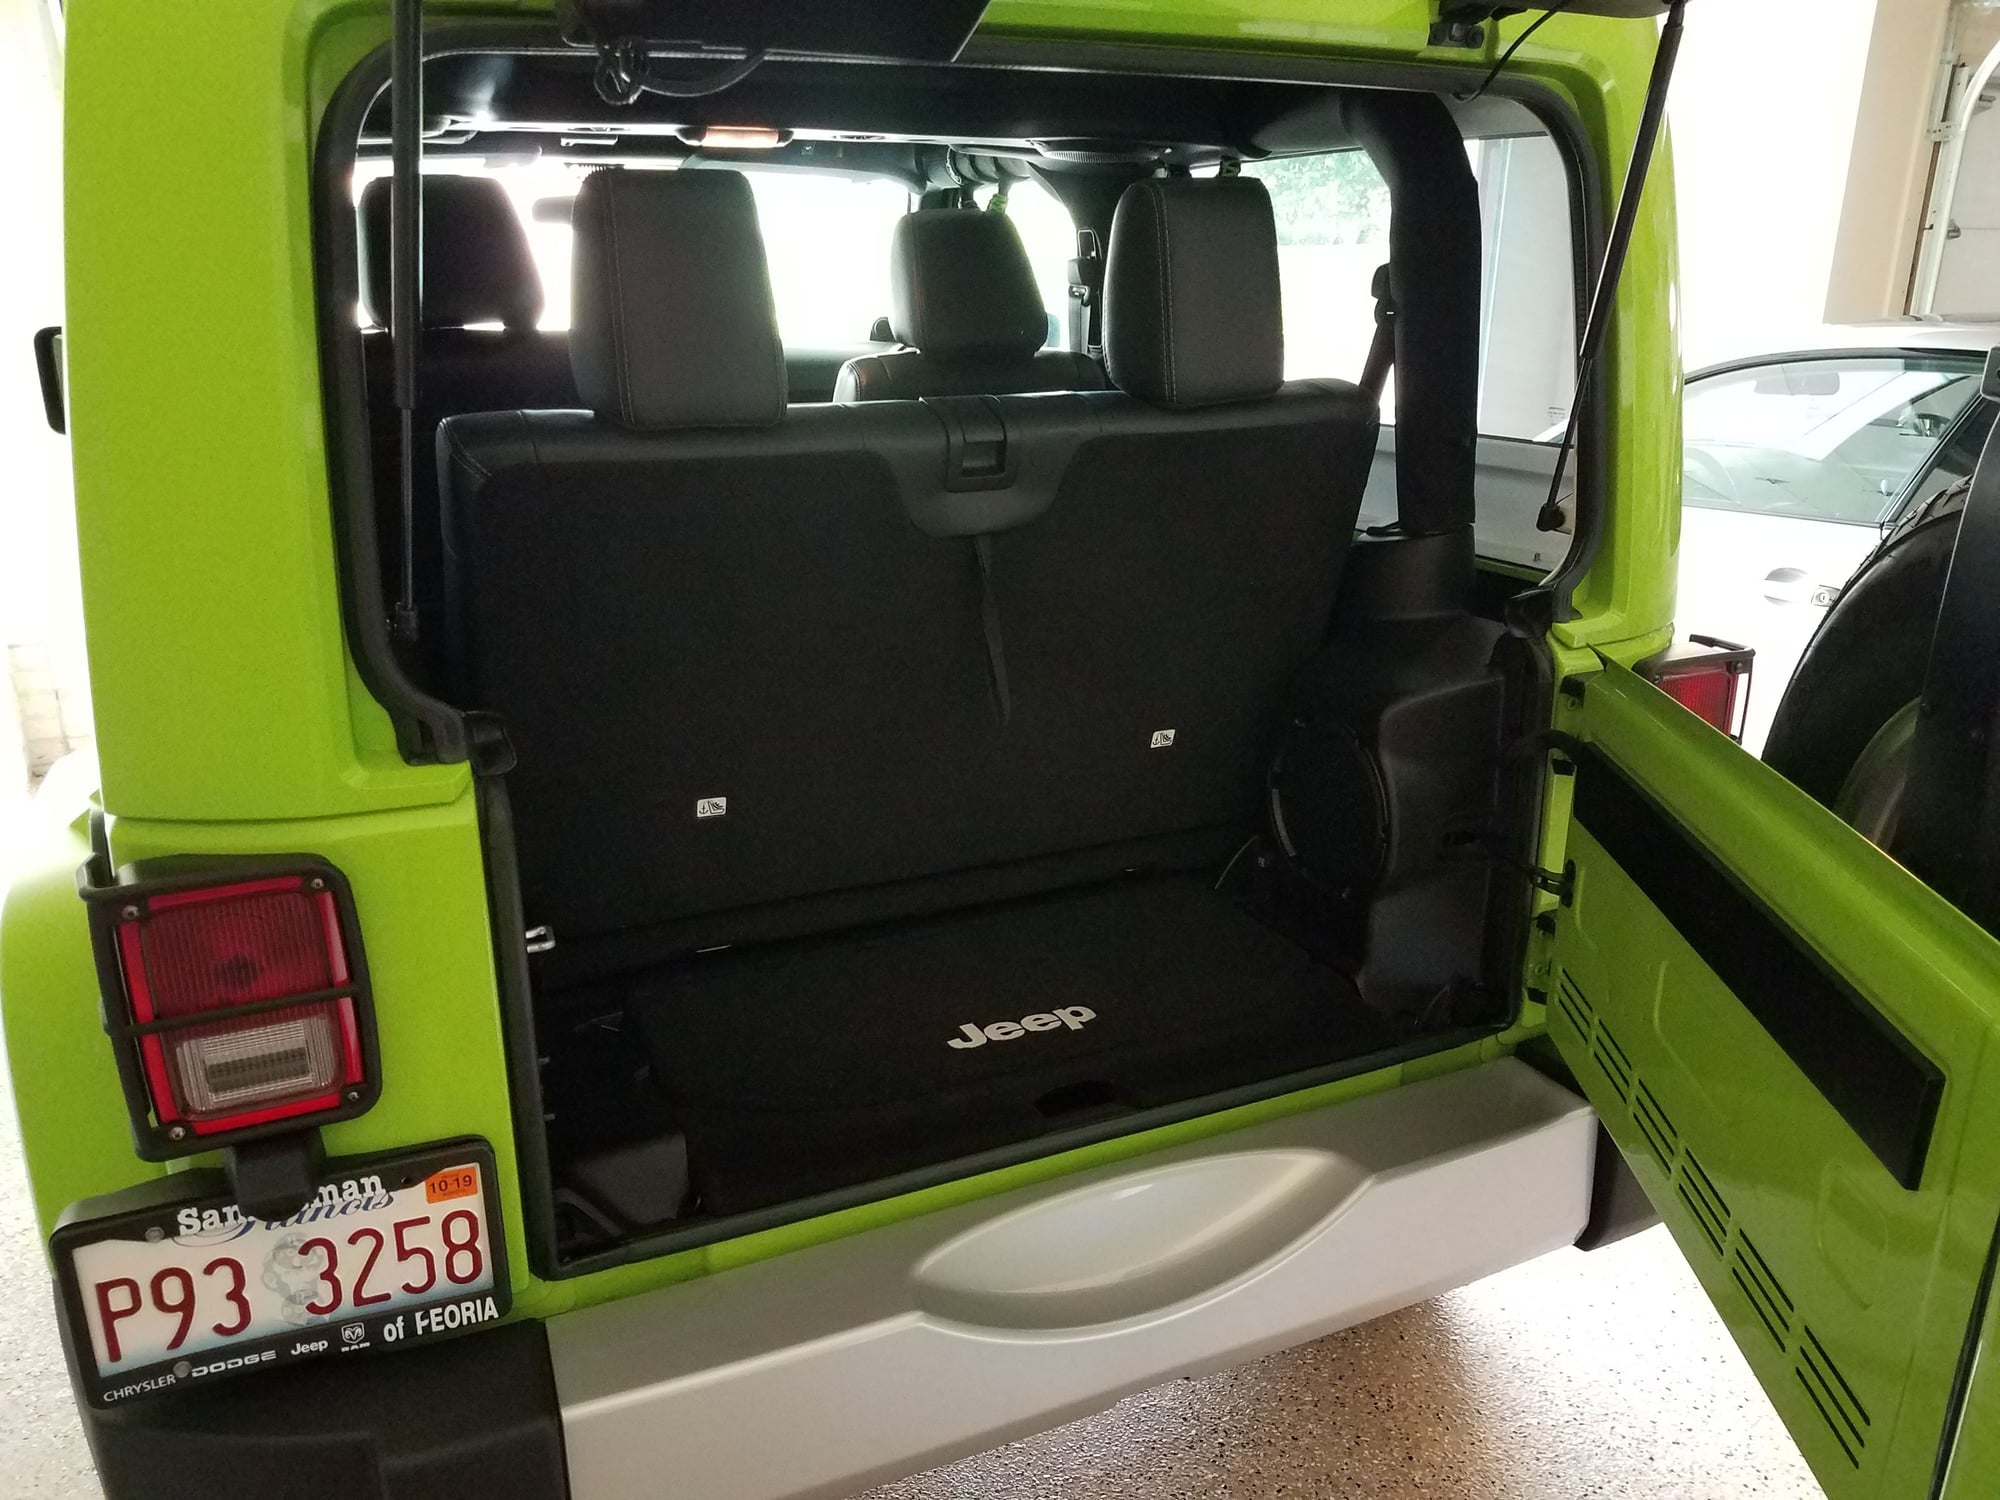 2012 Jeep Wrangler - Gecko Green Sahara, 2012, 13,800 Miles fully loaded - Used - VIN 1C4AJWBG1CL242281 - 13,800 Miles - 6 cyl - 4WD - Manual - SUV - Other - Peoria, IL 61615, United States